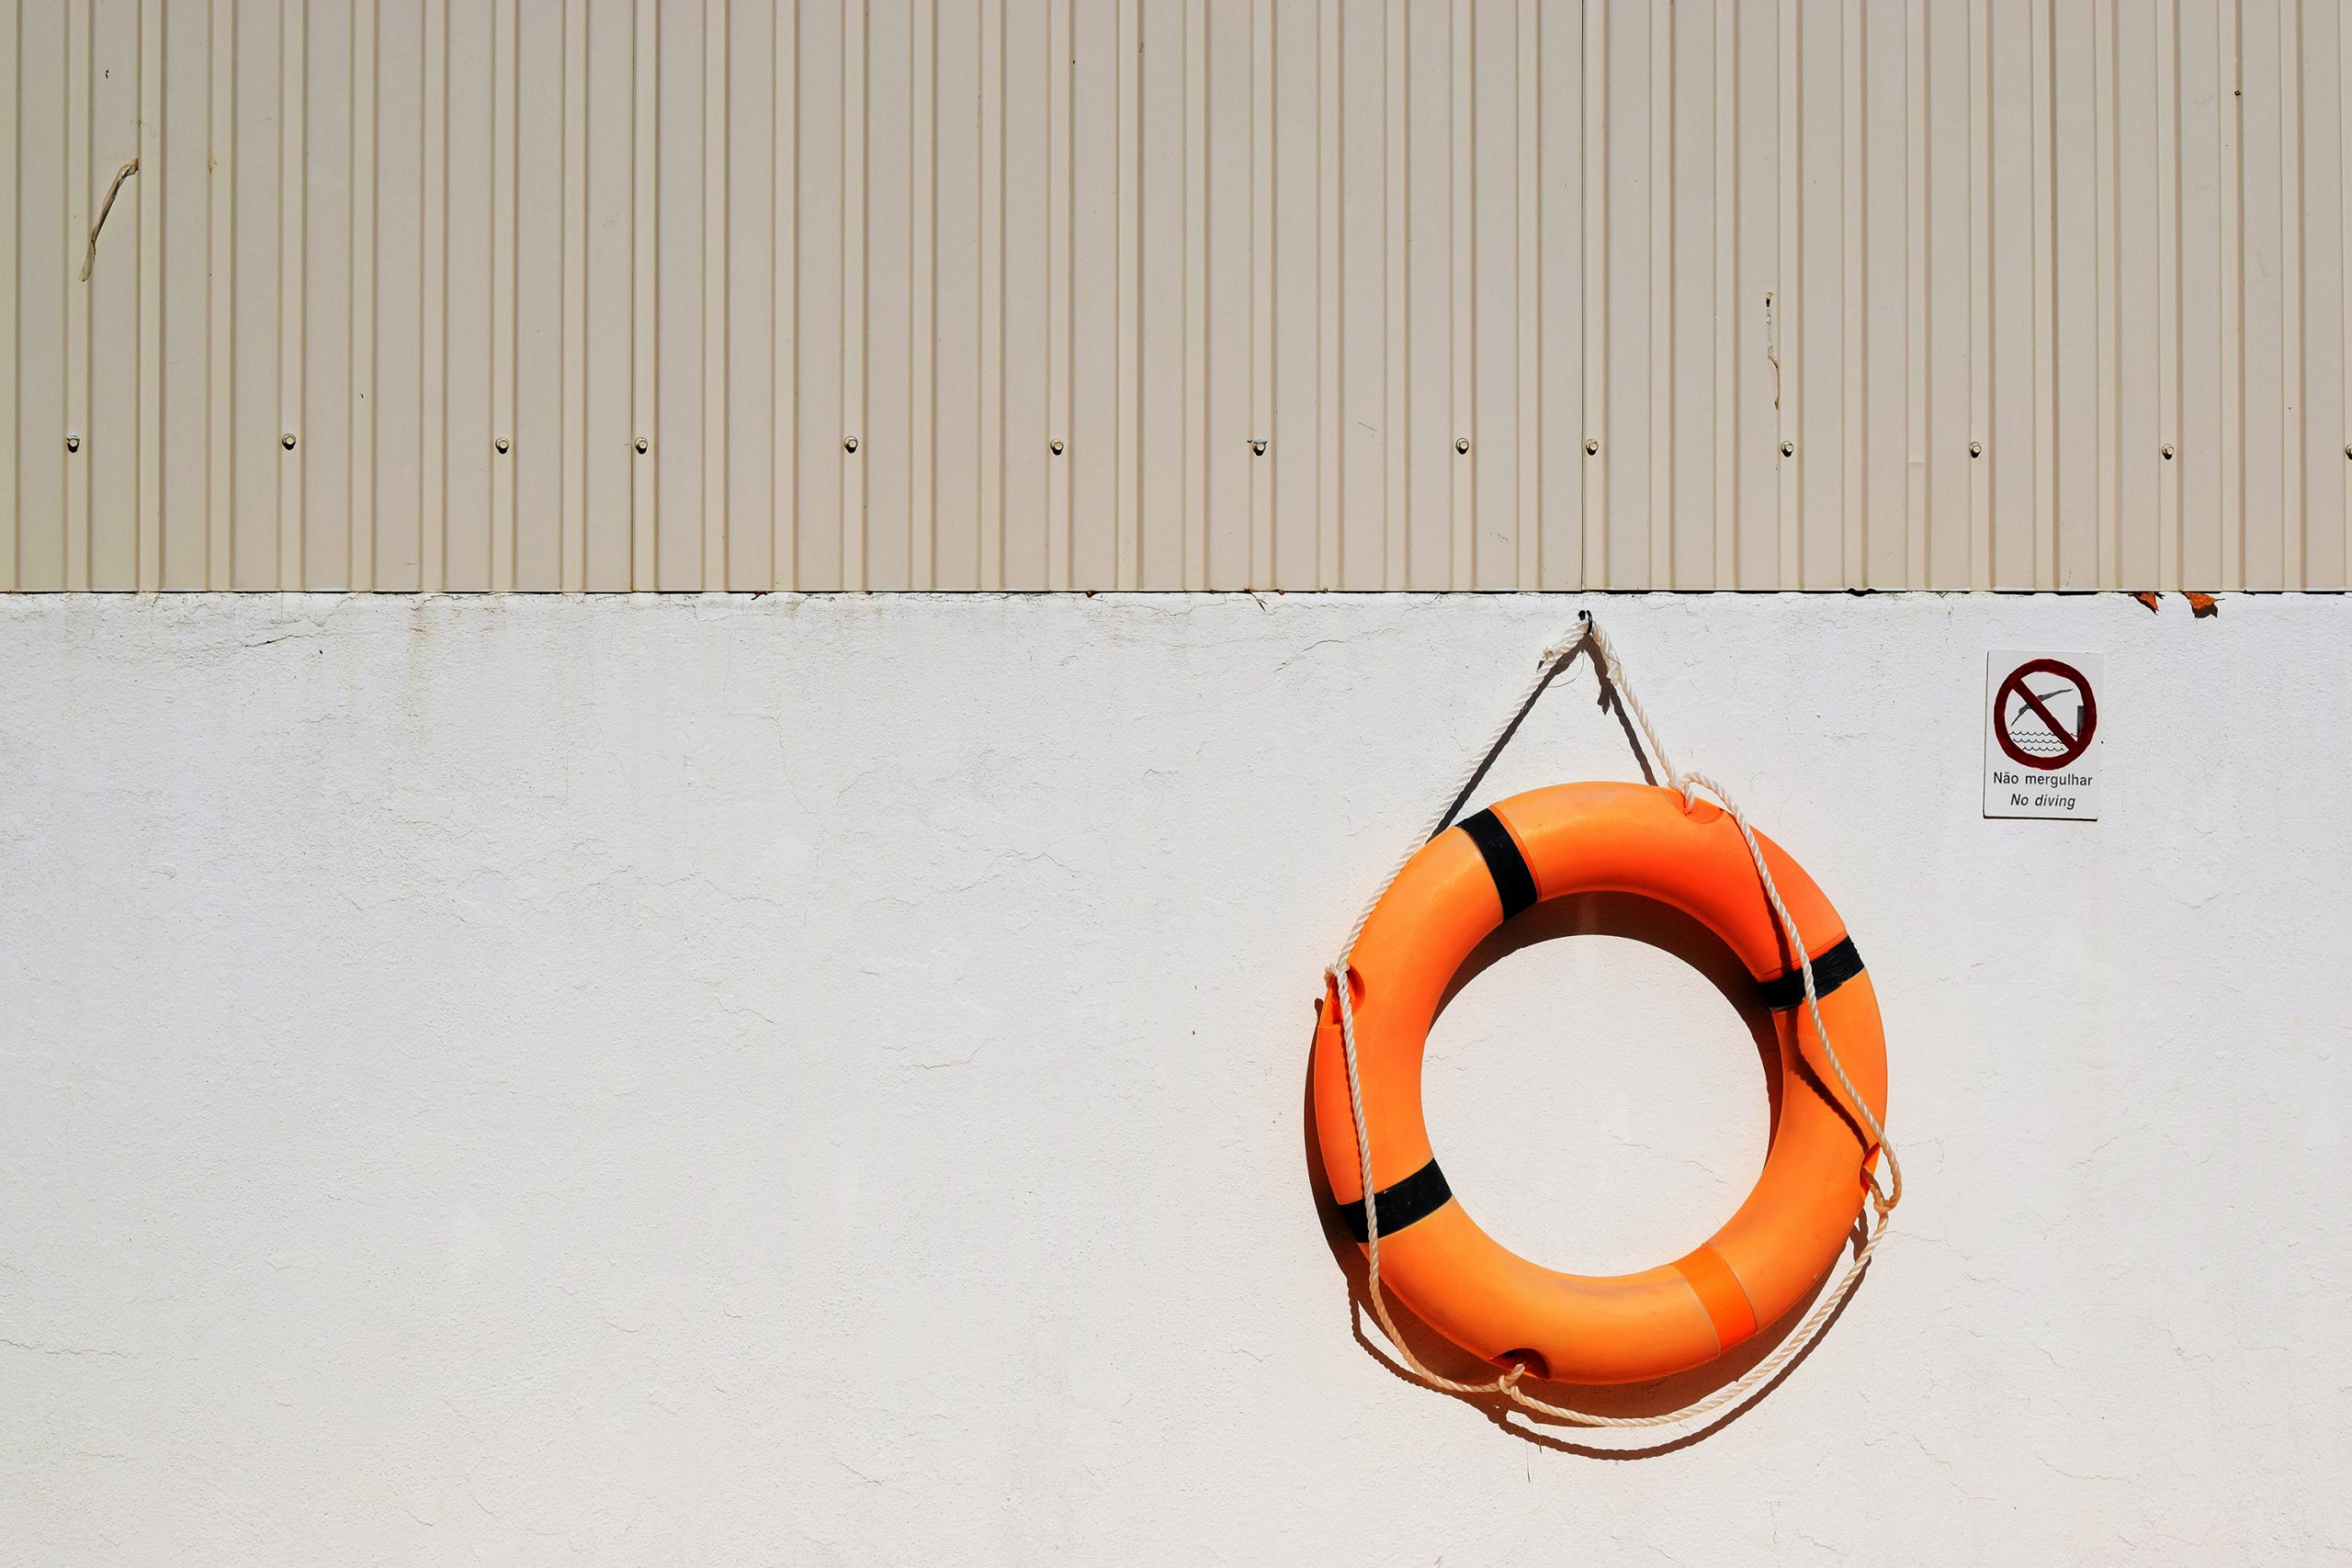 photon of boat lifesaver hanging on a wall